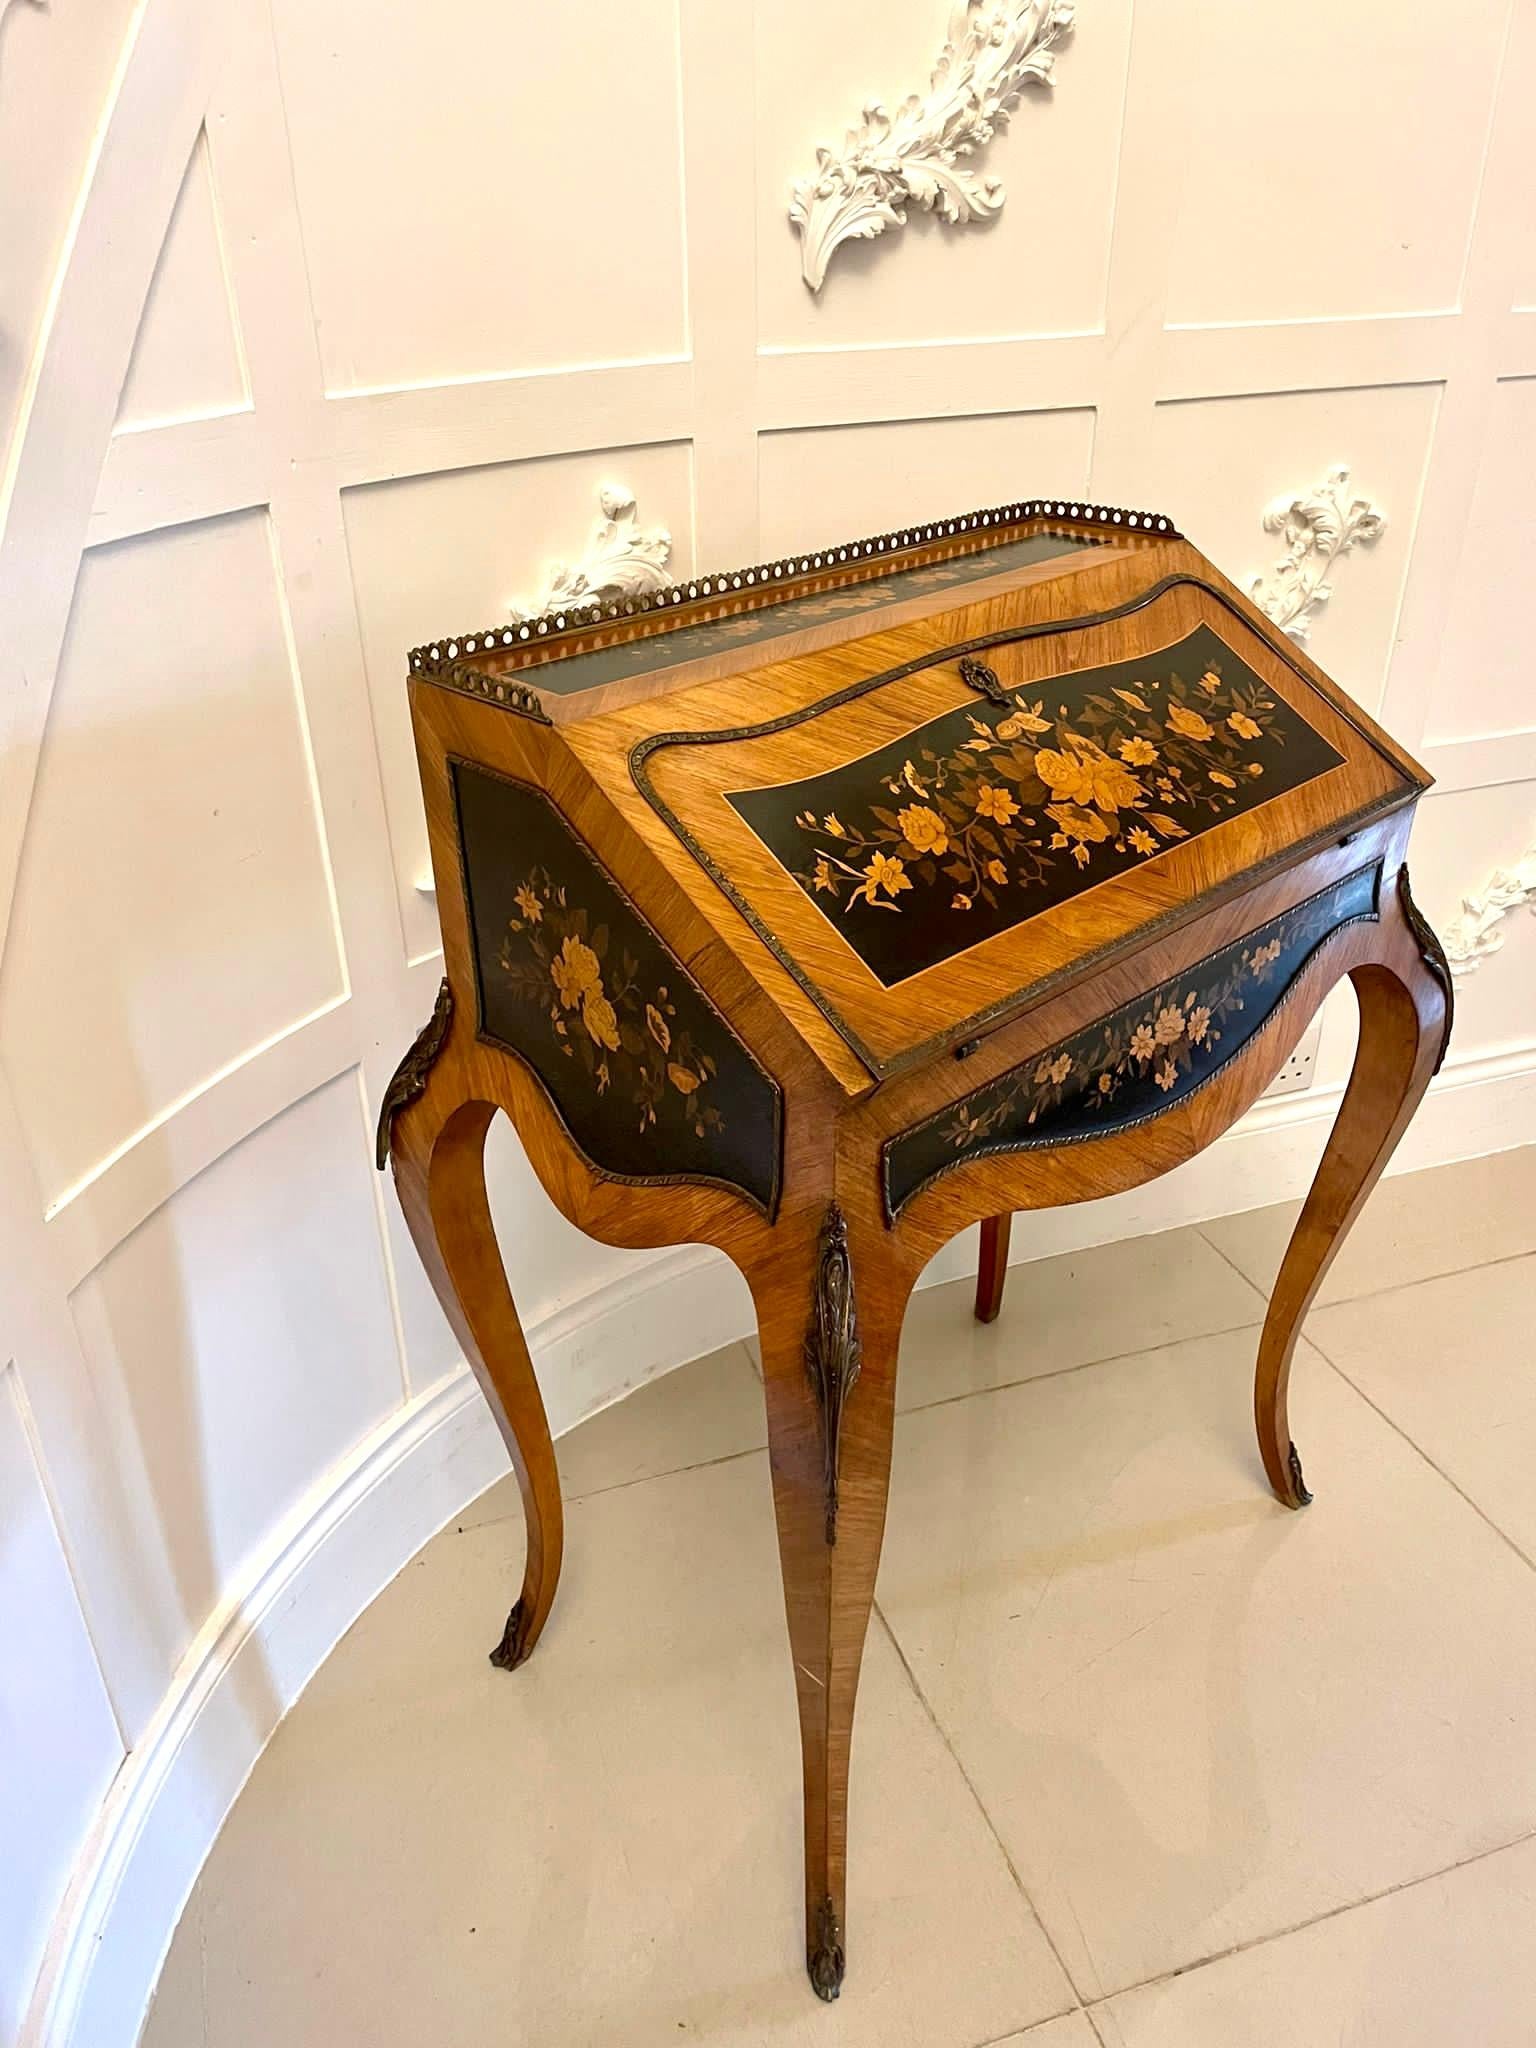 Antique Victorian quality satinwood freestanding marquetry inlaid French bureau having the original brass gallery, beautiful floral marquetry inlaid top above a satinwood floral marquetry inlaid fall with ornate gilded brass beading opening to